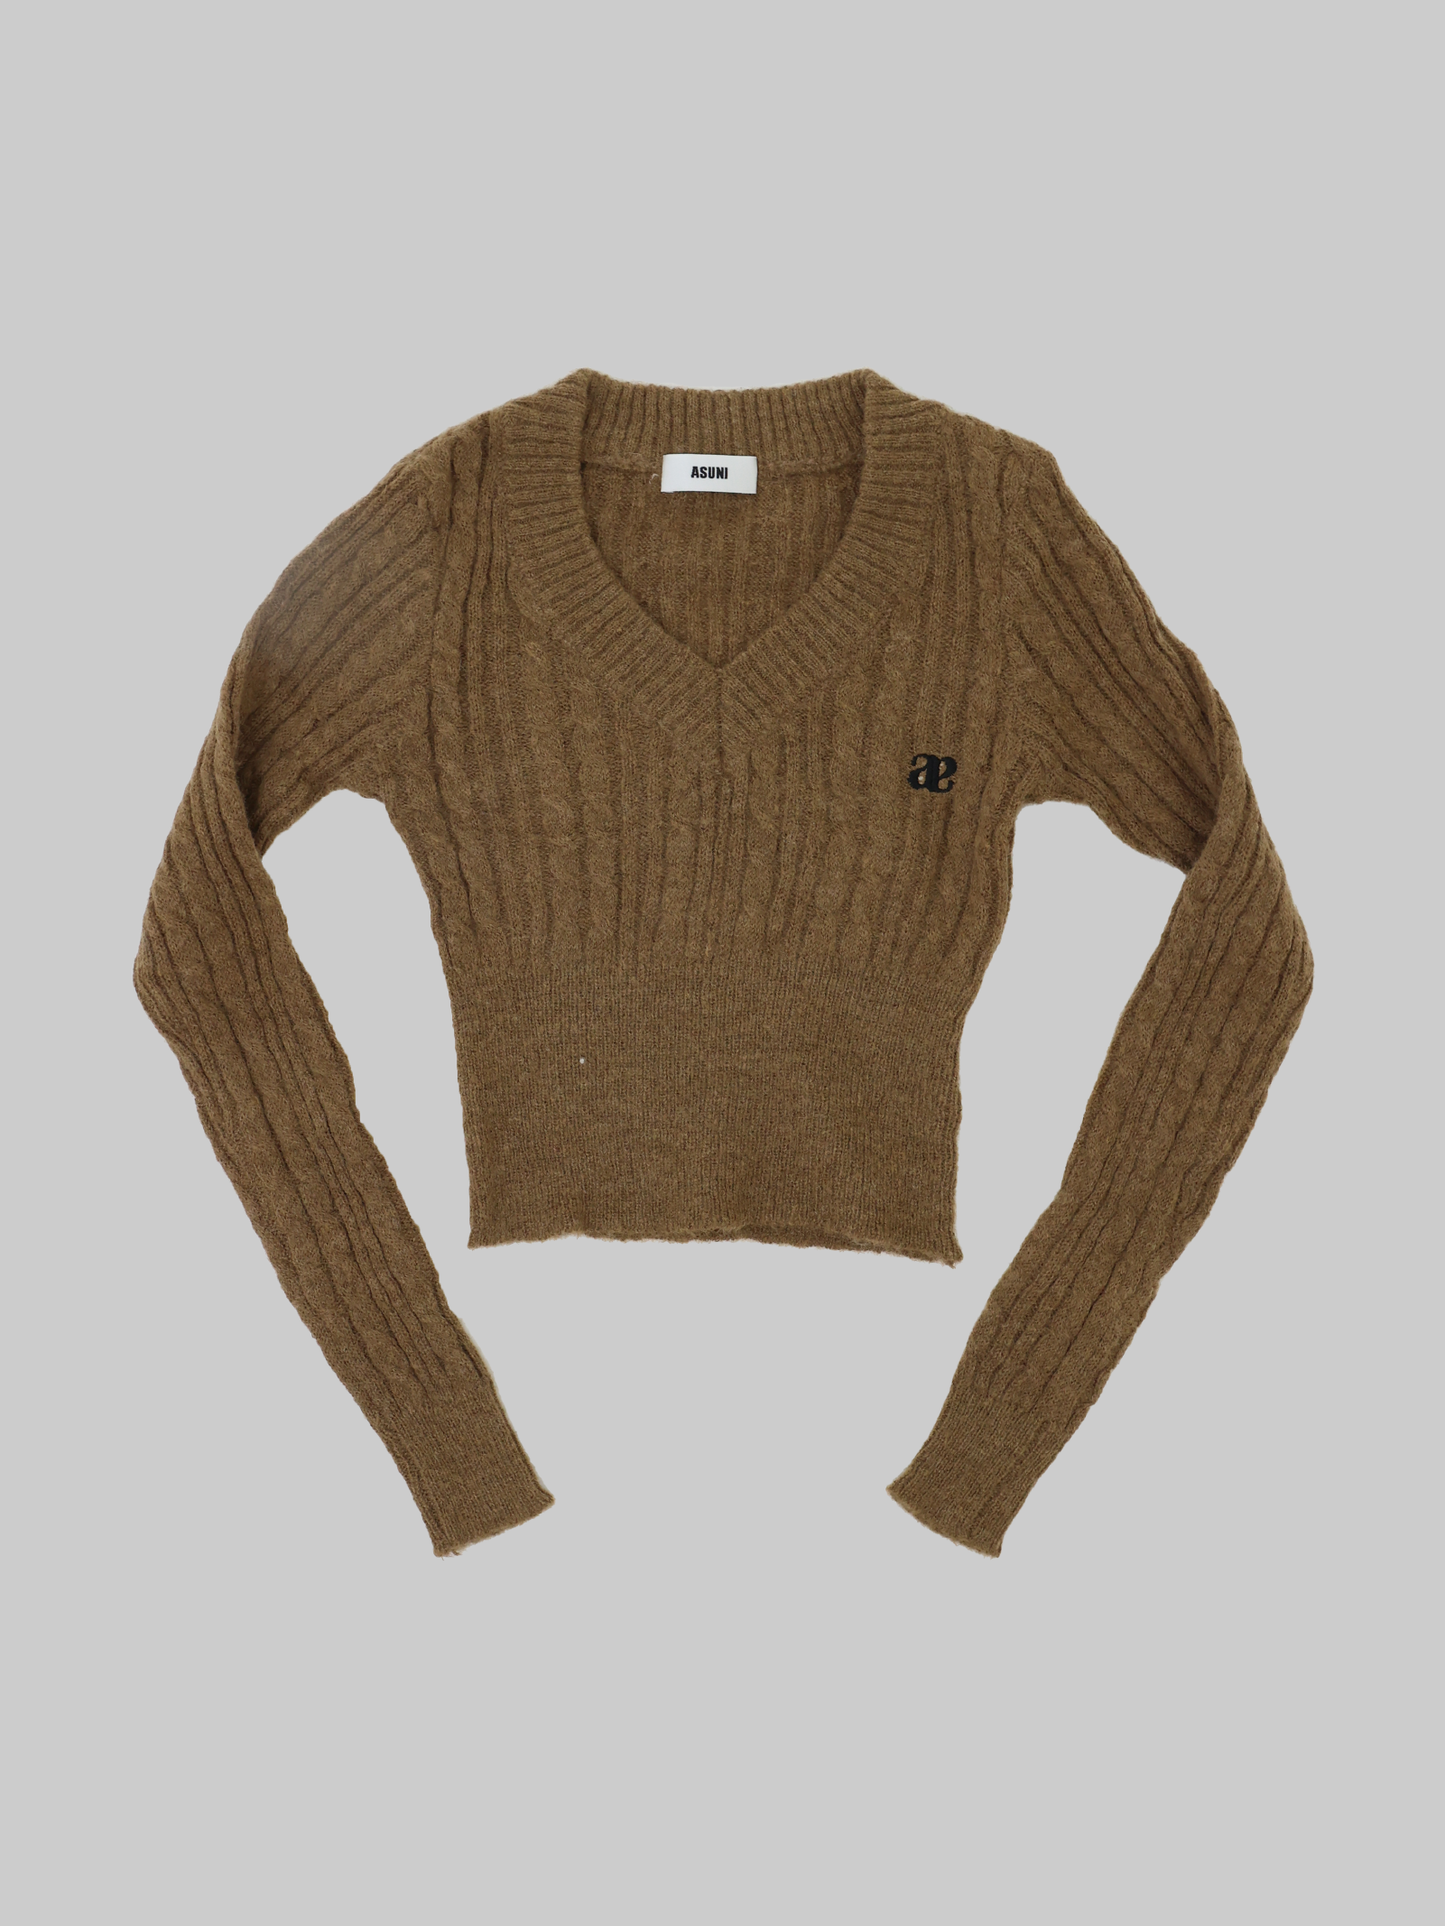 Double A logo V-neck knitted cold sweater in brown